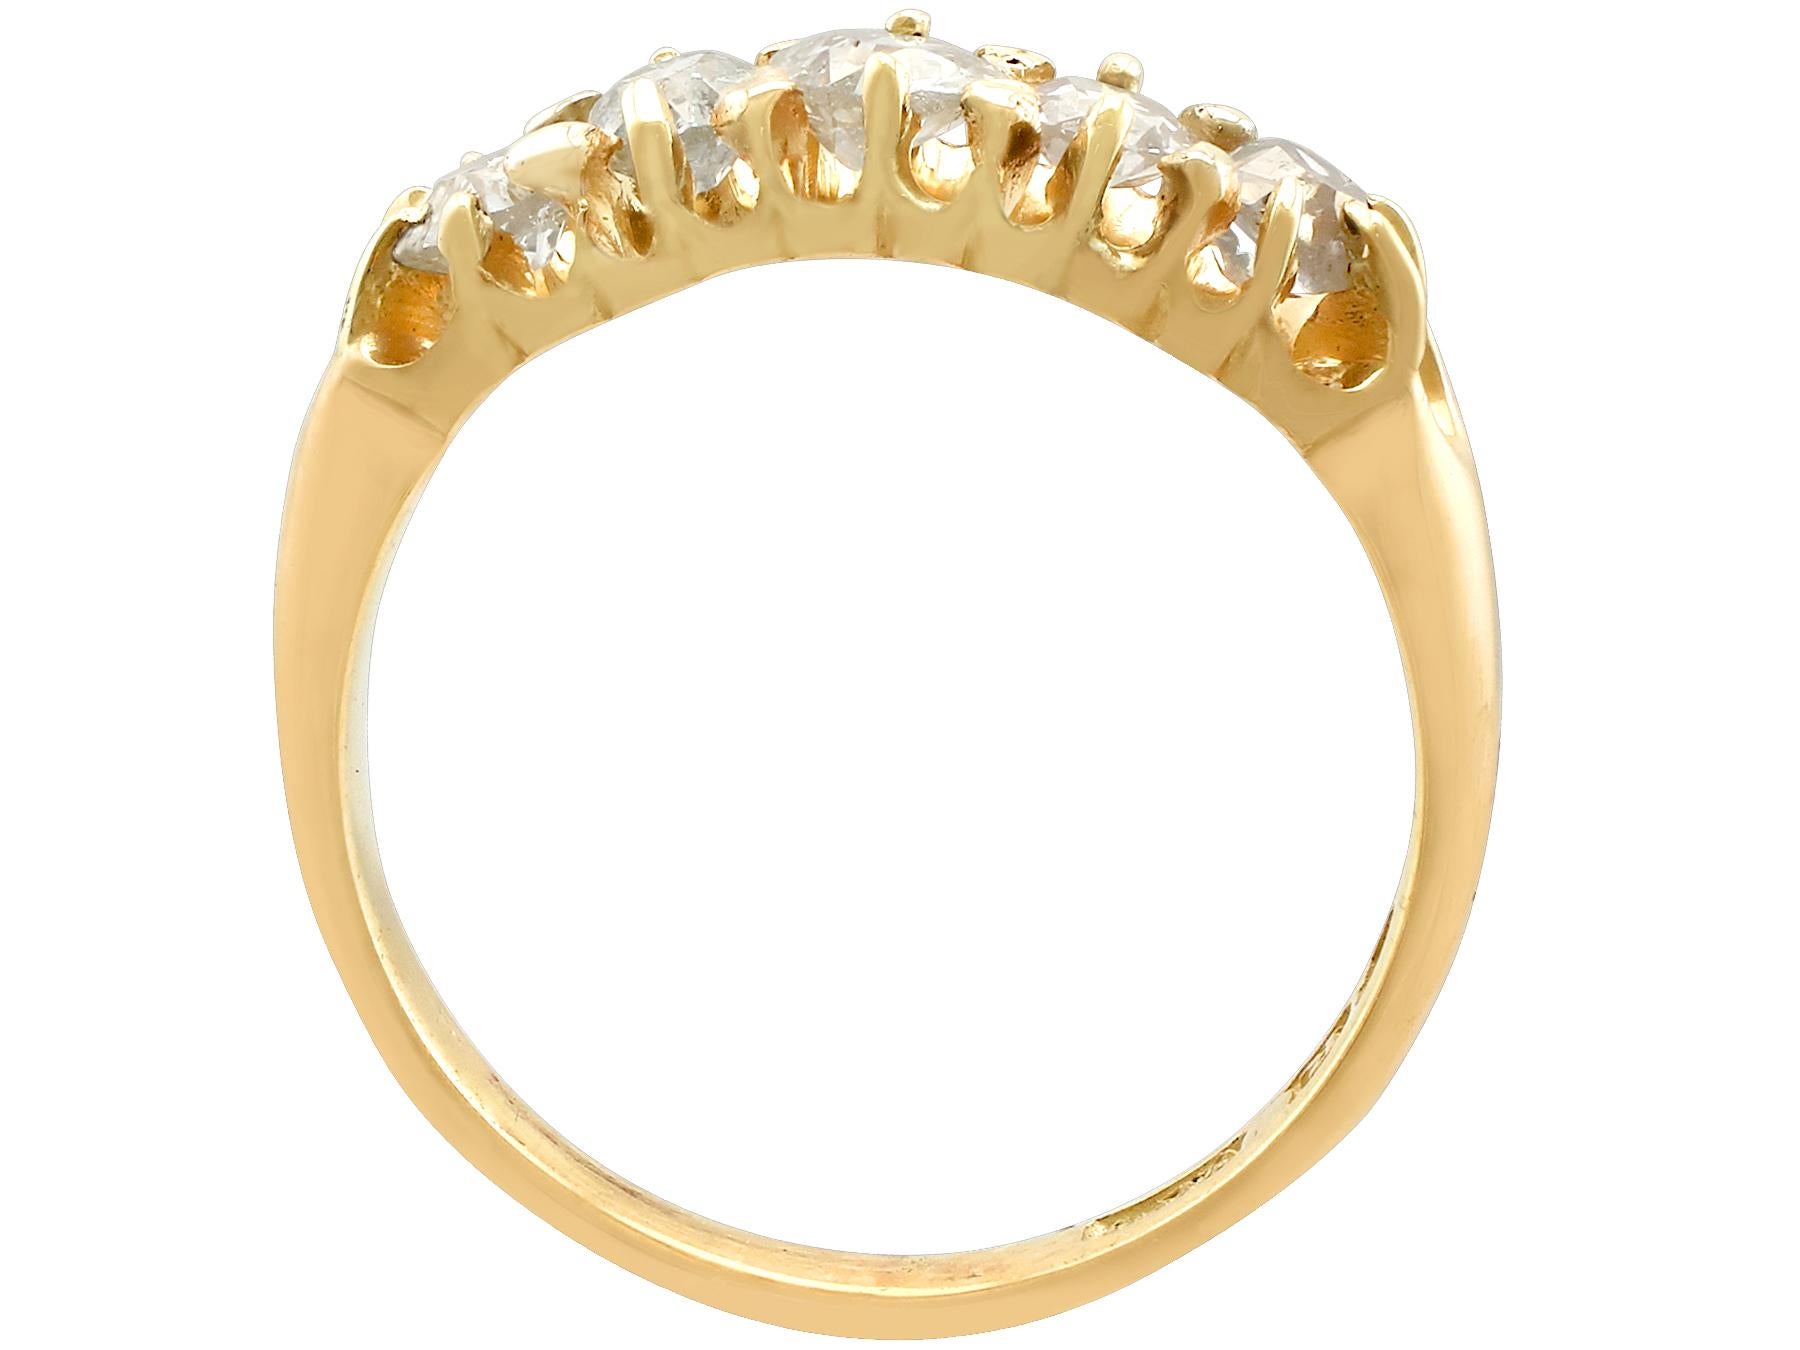 Women's Antique Five Stone Diamond Ring in Yellow Gold